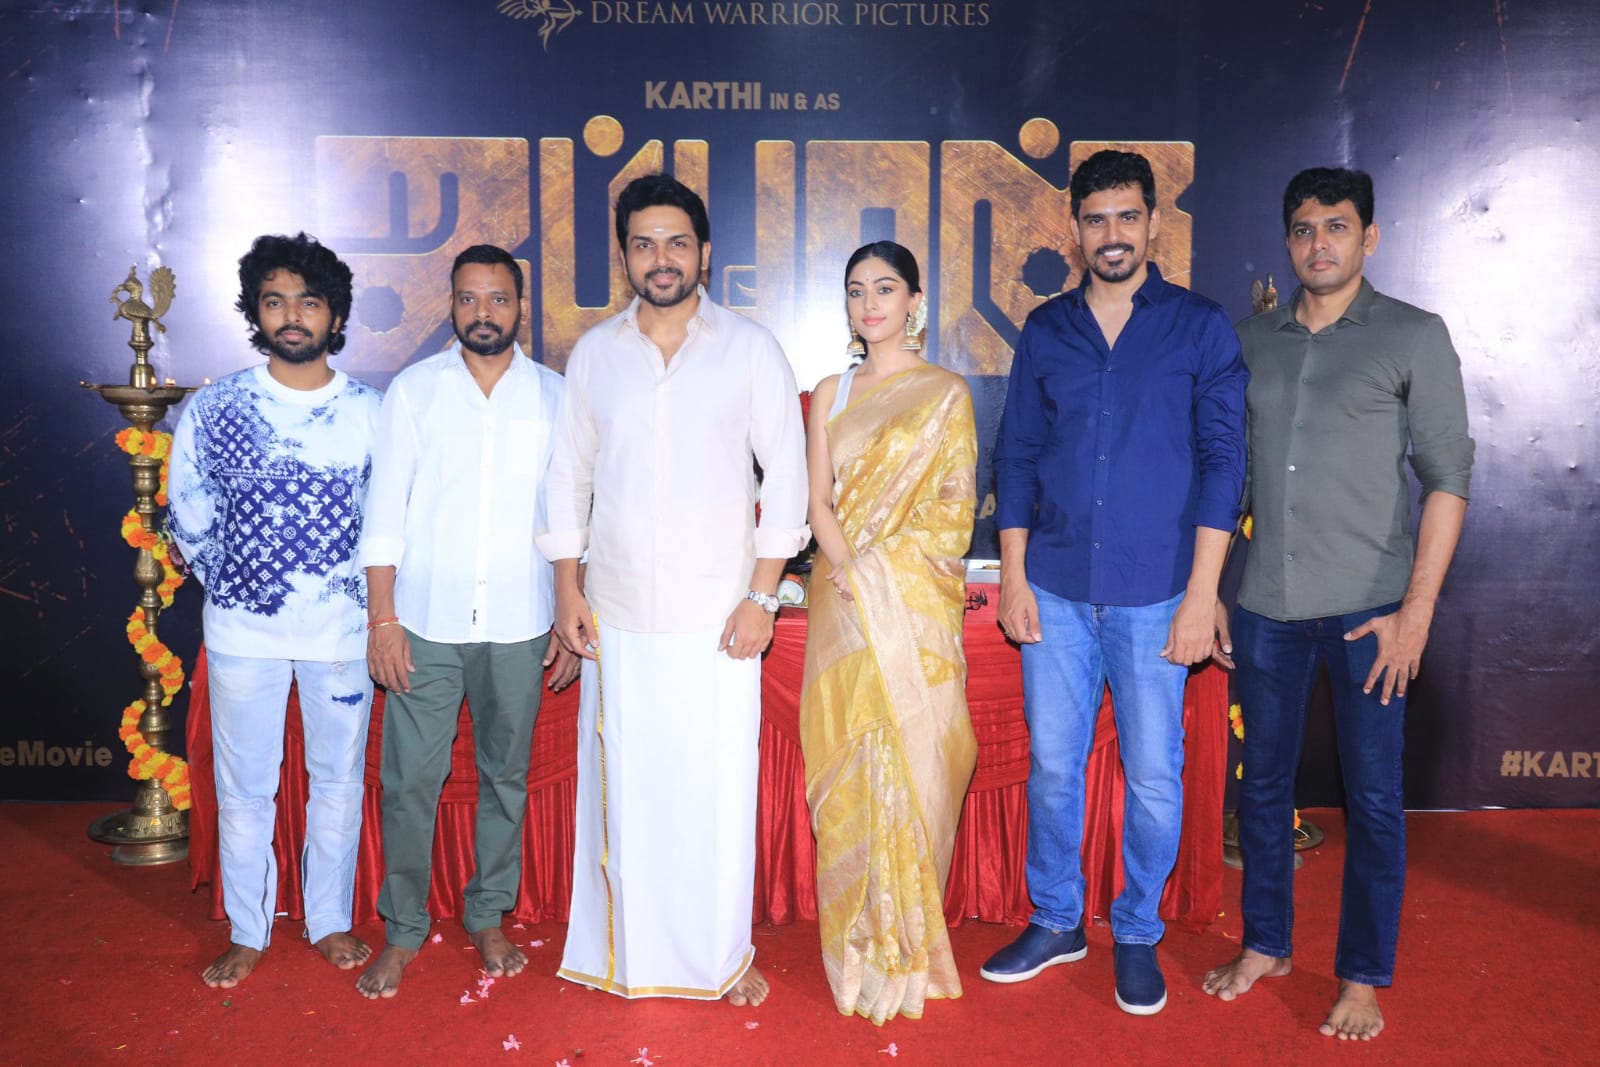 Karthi Japan 2nd schedule starts today in Palakad sources 